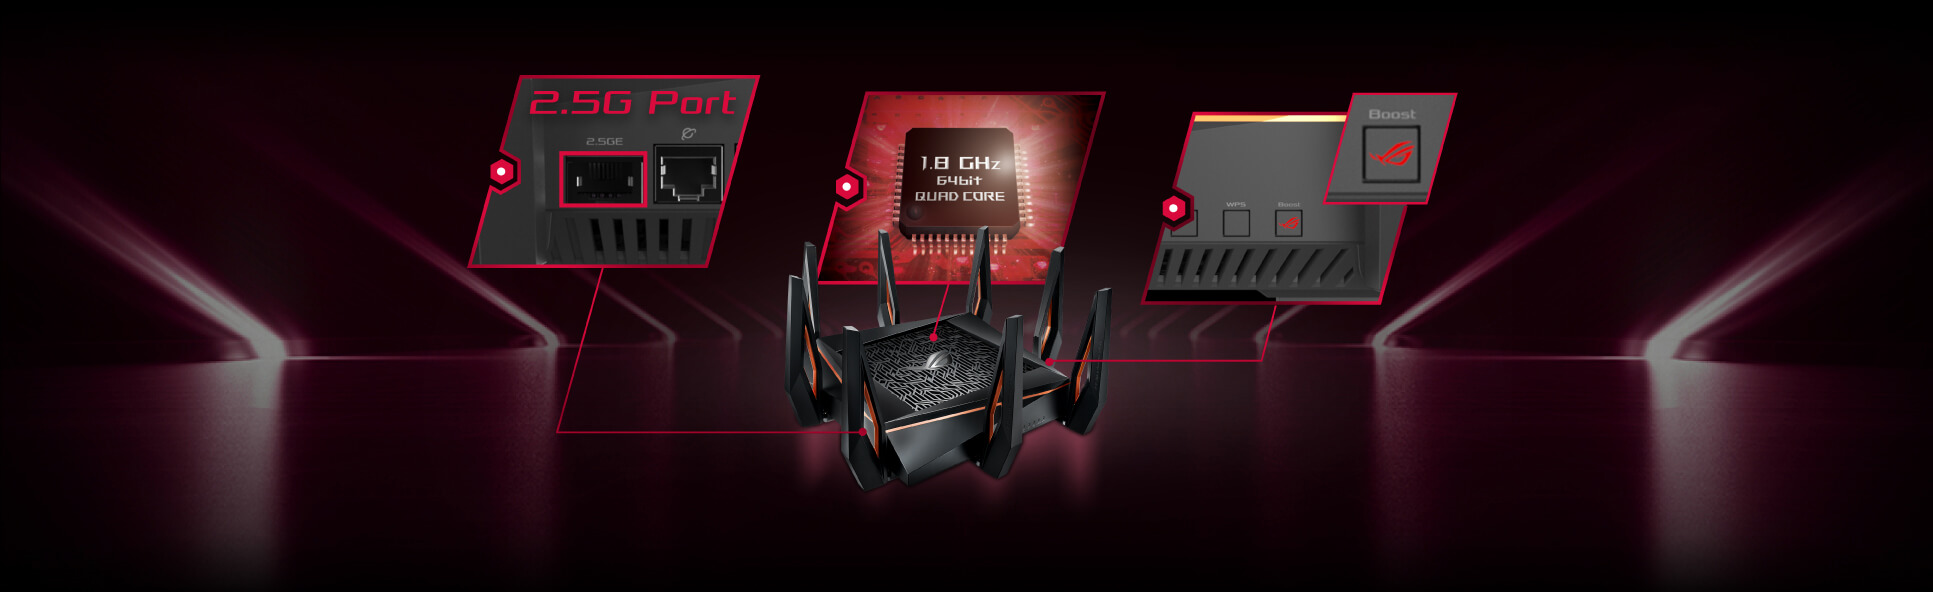 ROG Rapture GT-AX11000 | Gaming Networking｜ROG - Republic of Gamers｜ROG Indonesia